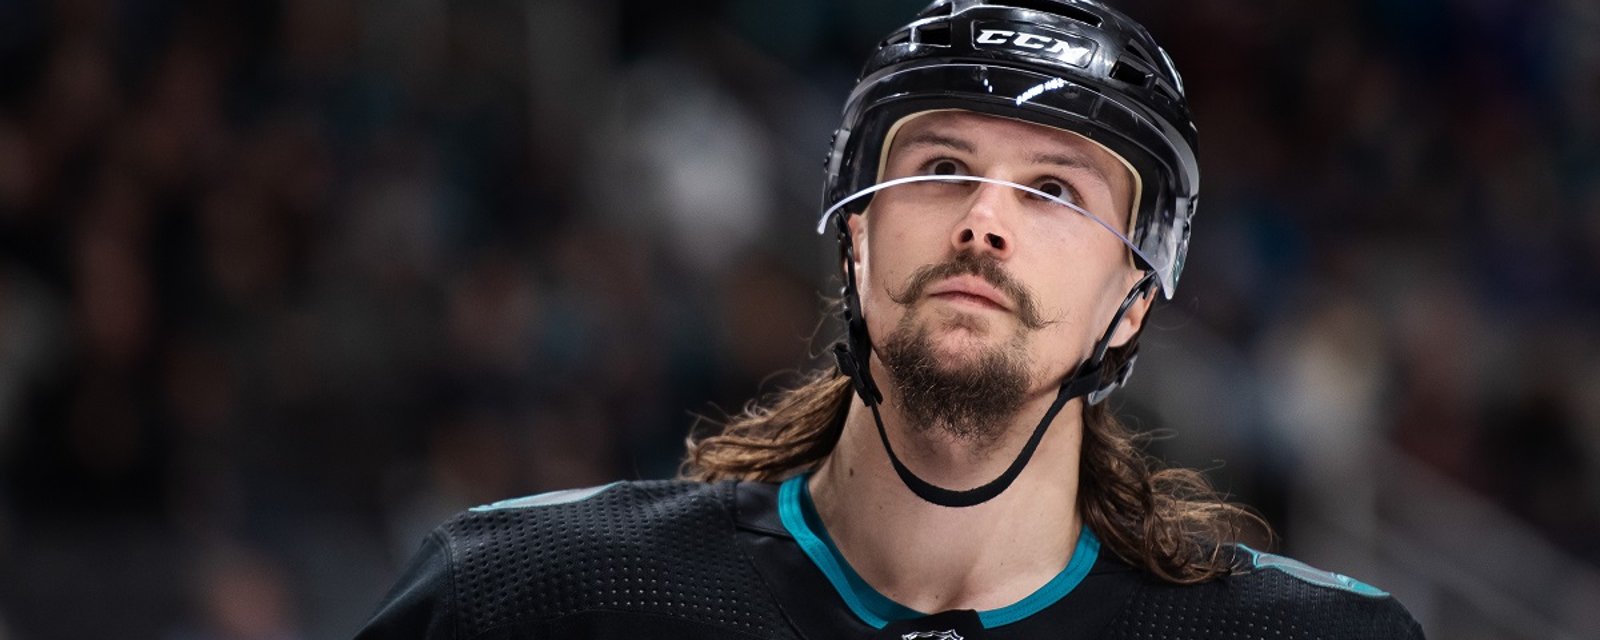 Breaking: Erik Karlsson facing a suspension for illegal hit to the head.